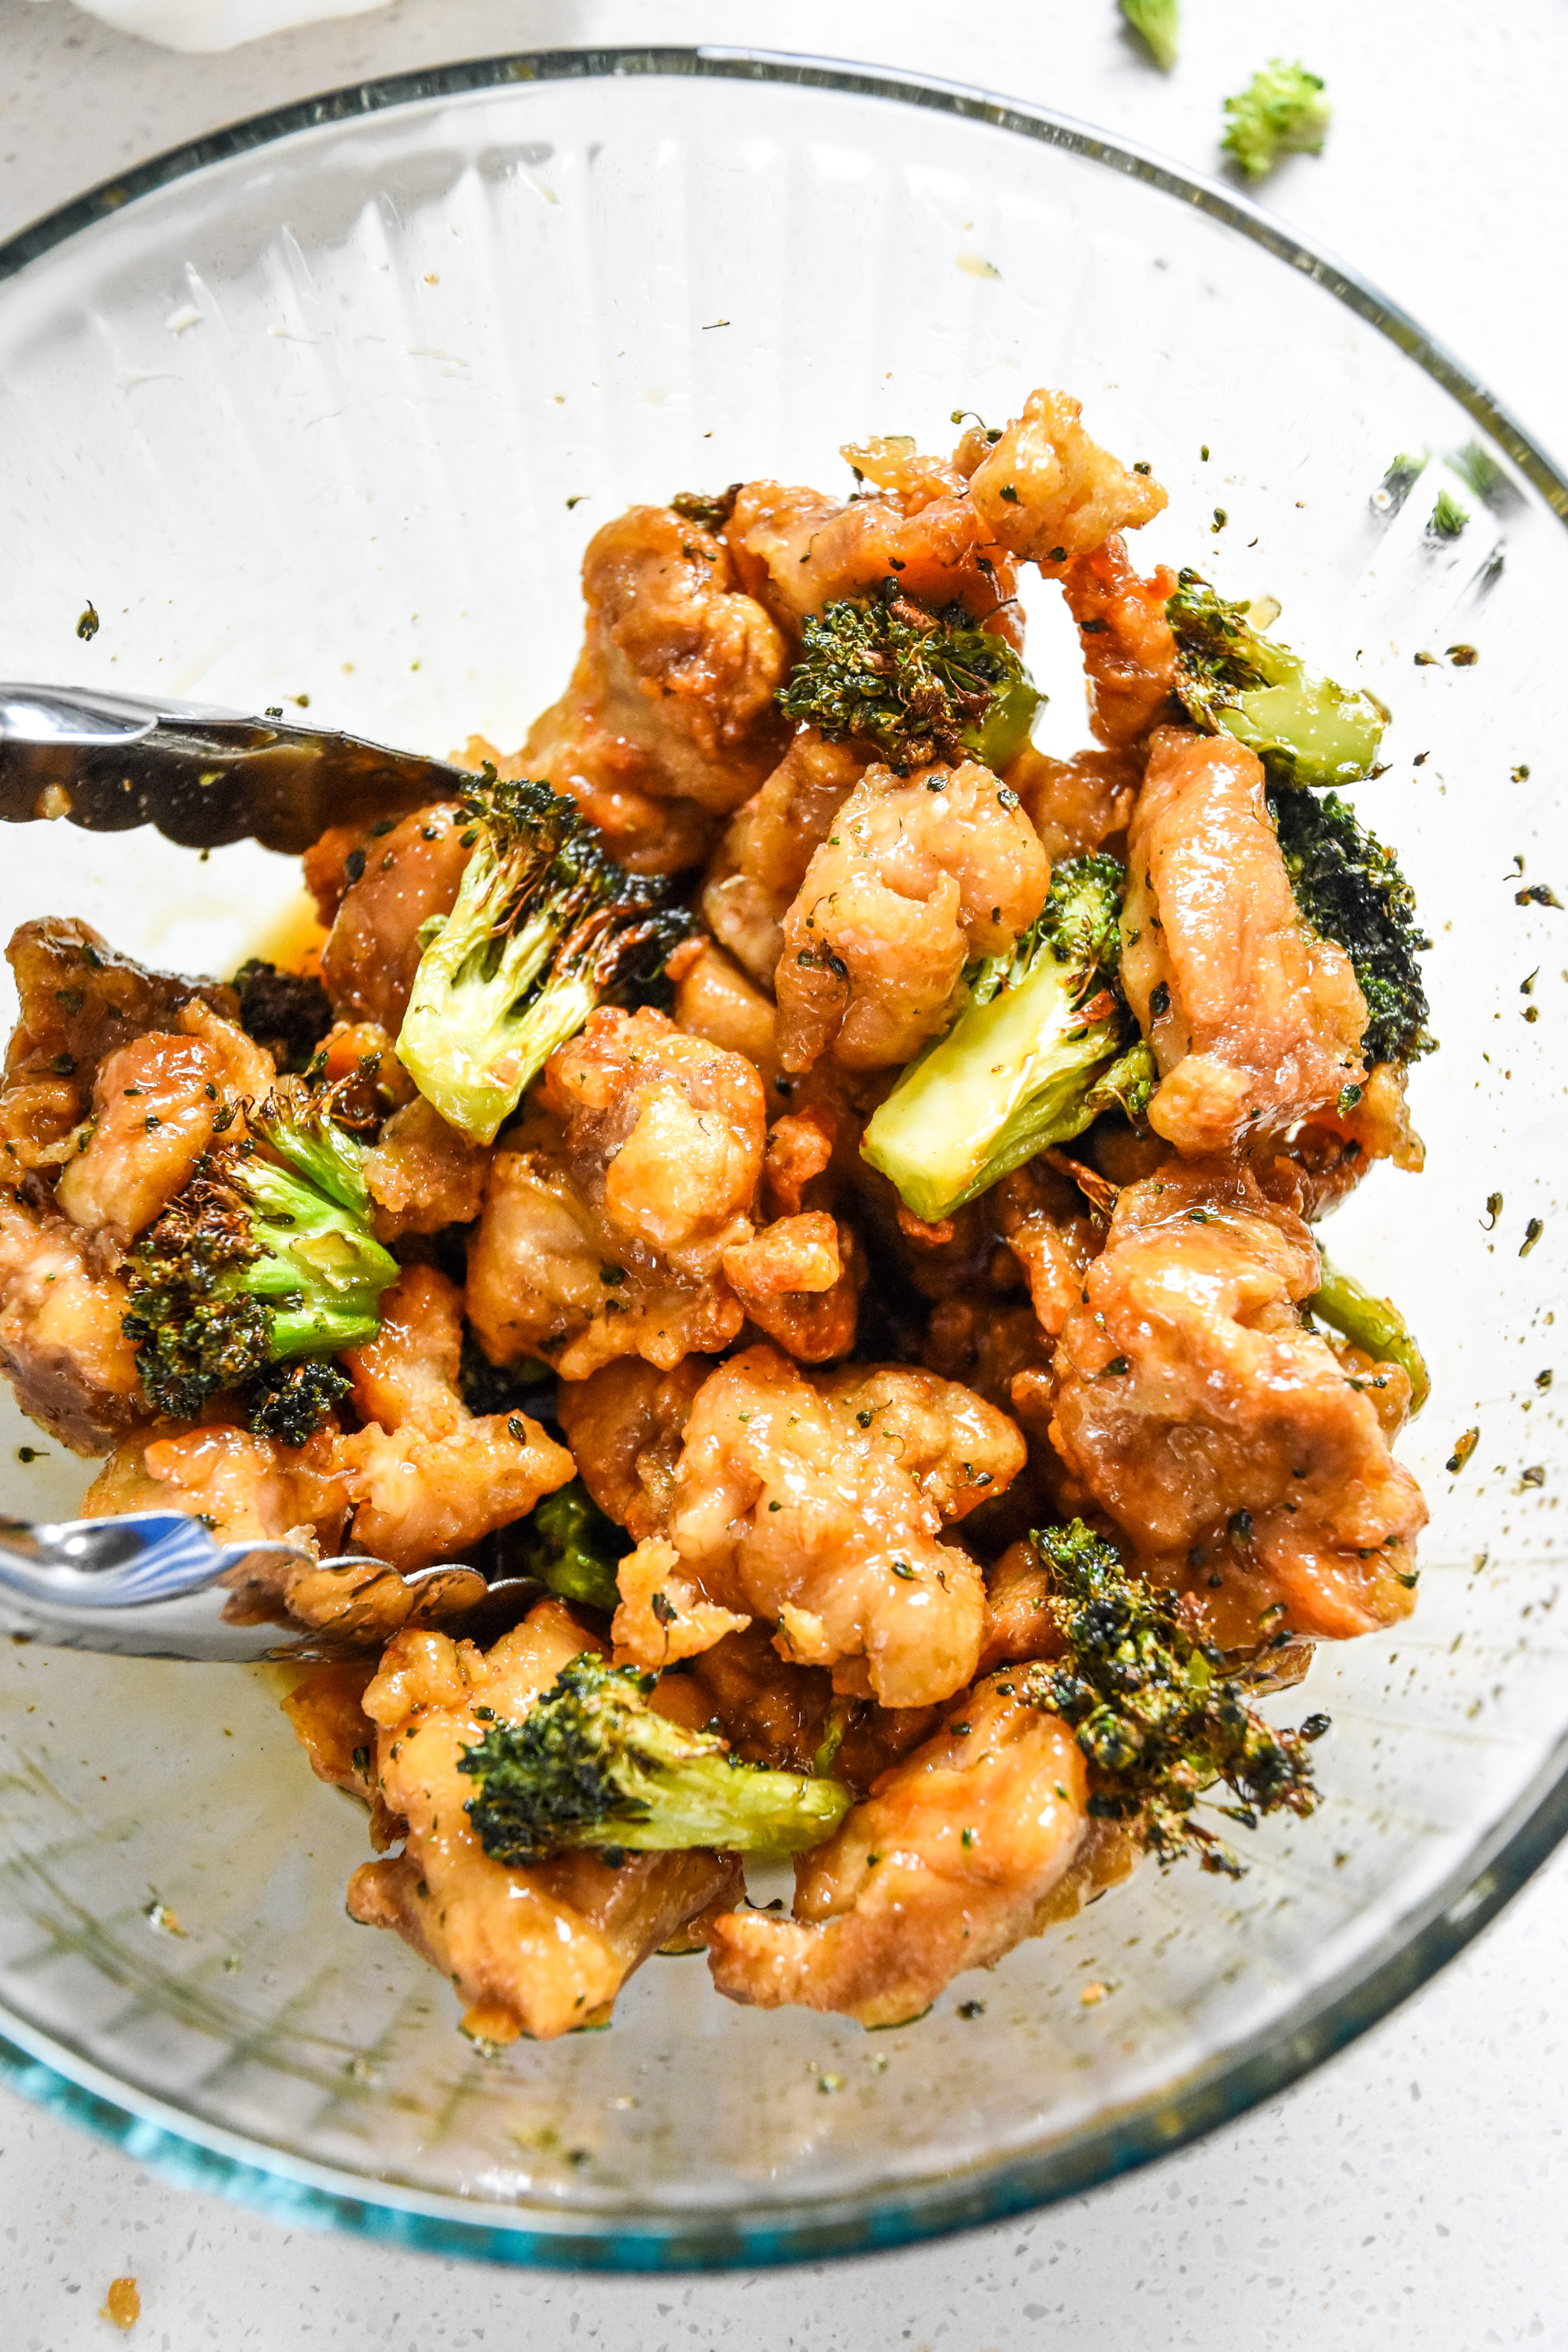 trader joes orange chicken and broccoli tossed in the orange sauce